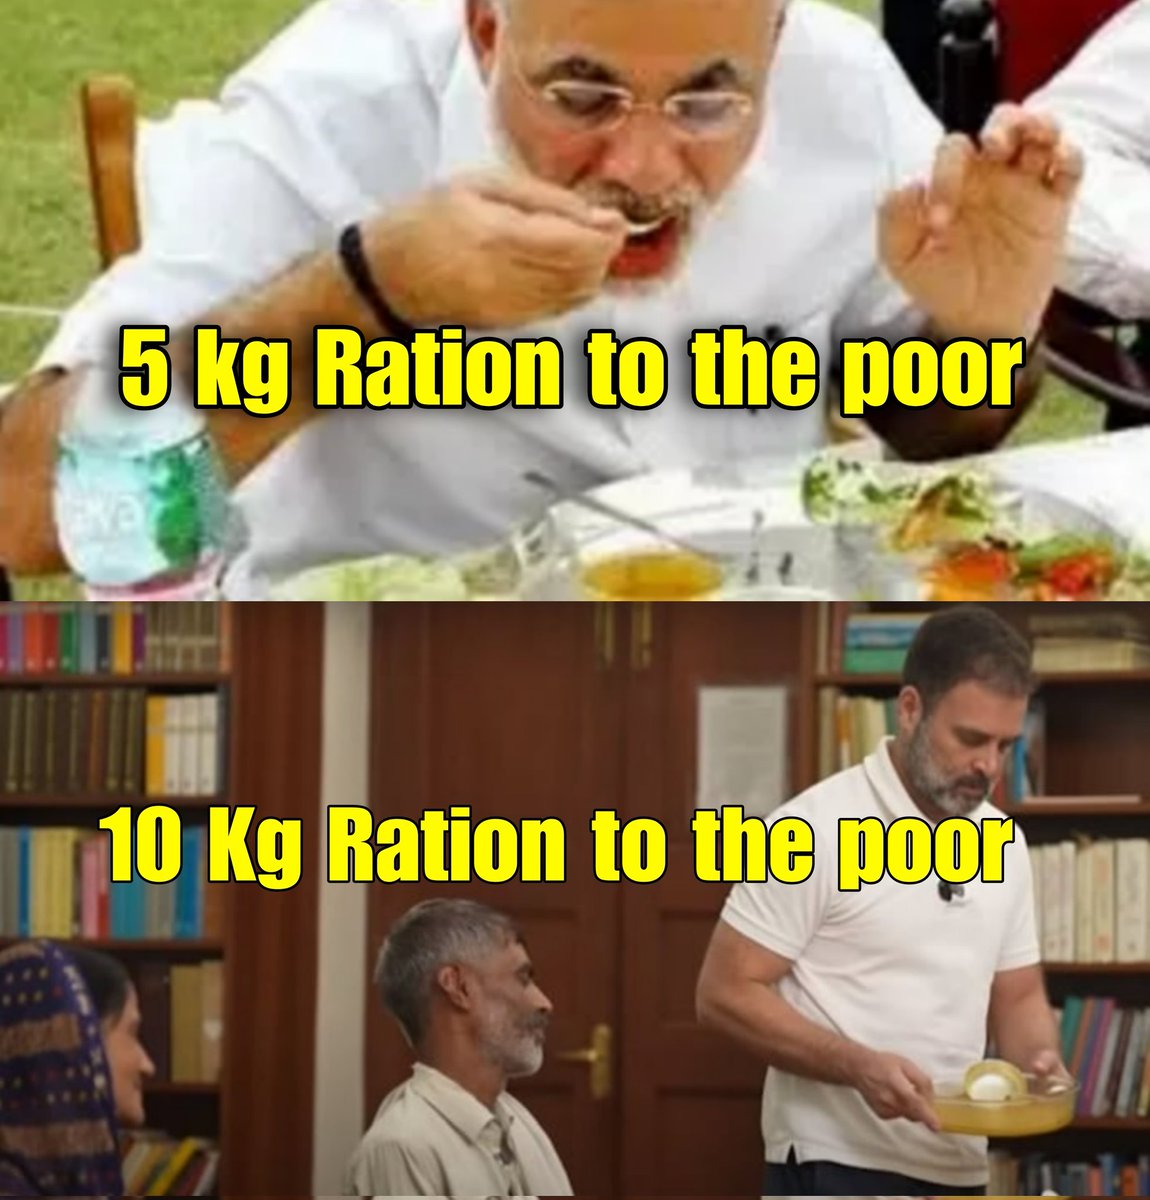 Masterstroke: Congress has announced 10 kgs of Ration to the poor people every month.